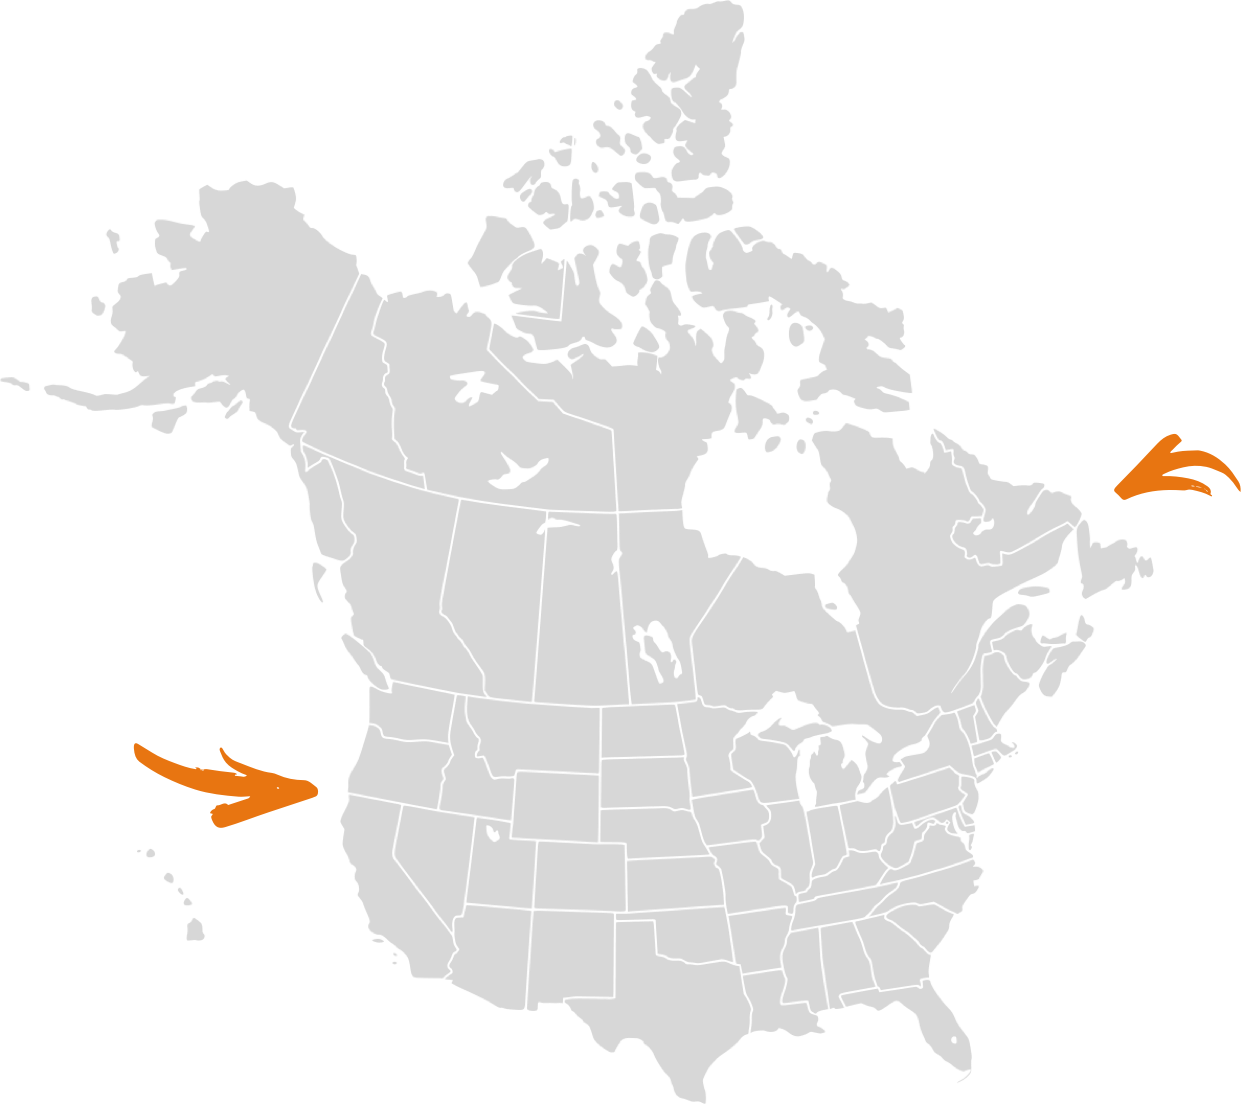 Stylized map of the United States and Canada